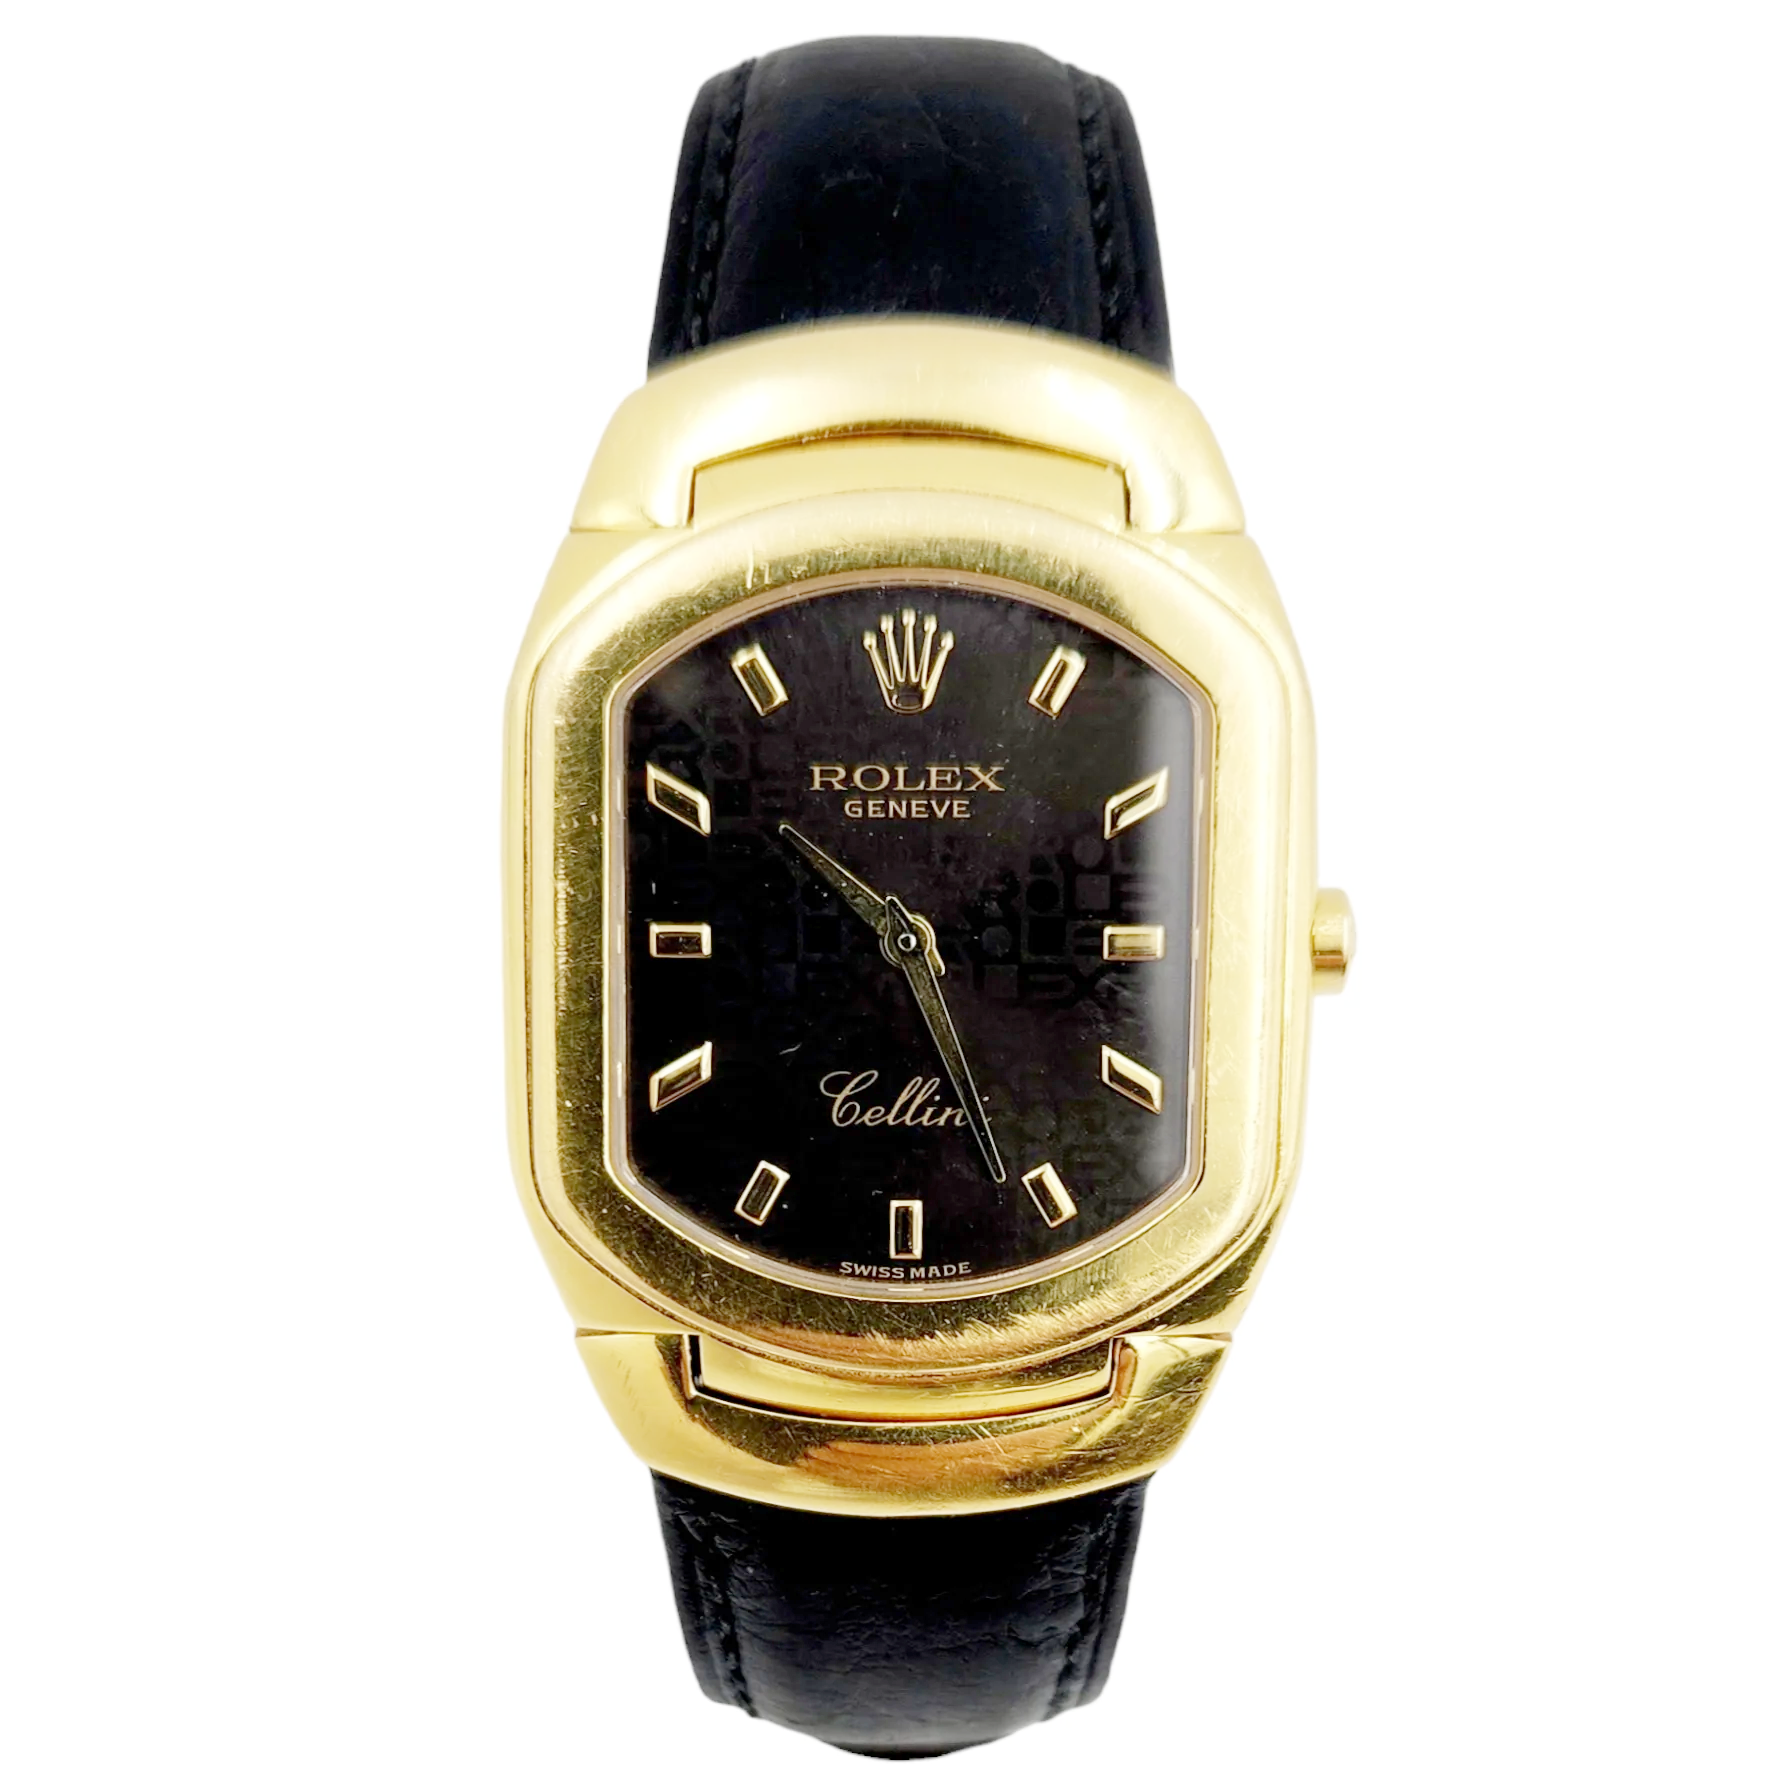 Men's Rolex Cellini Vintage 18K Yellow Gold Watch with Black Dial and Black Leather Strap. (Pre-Owned 6633)